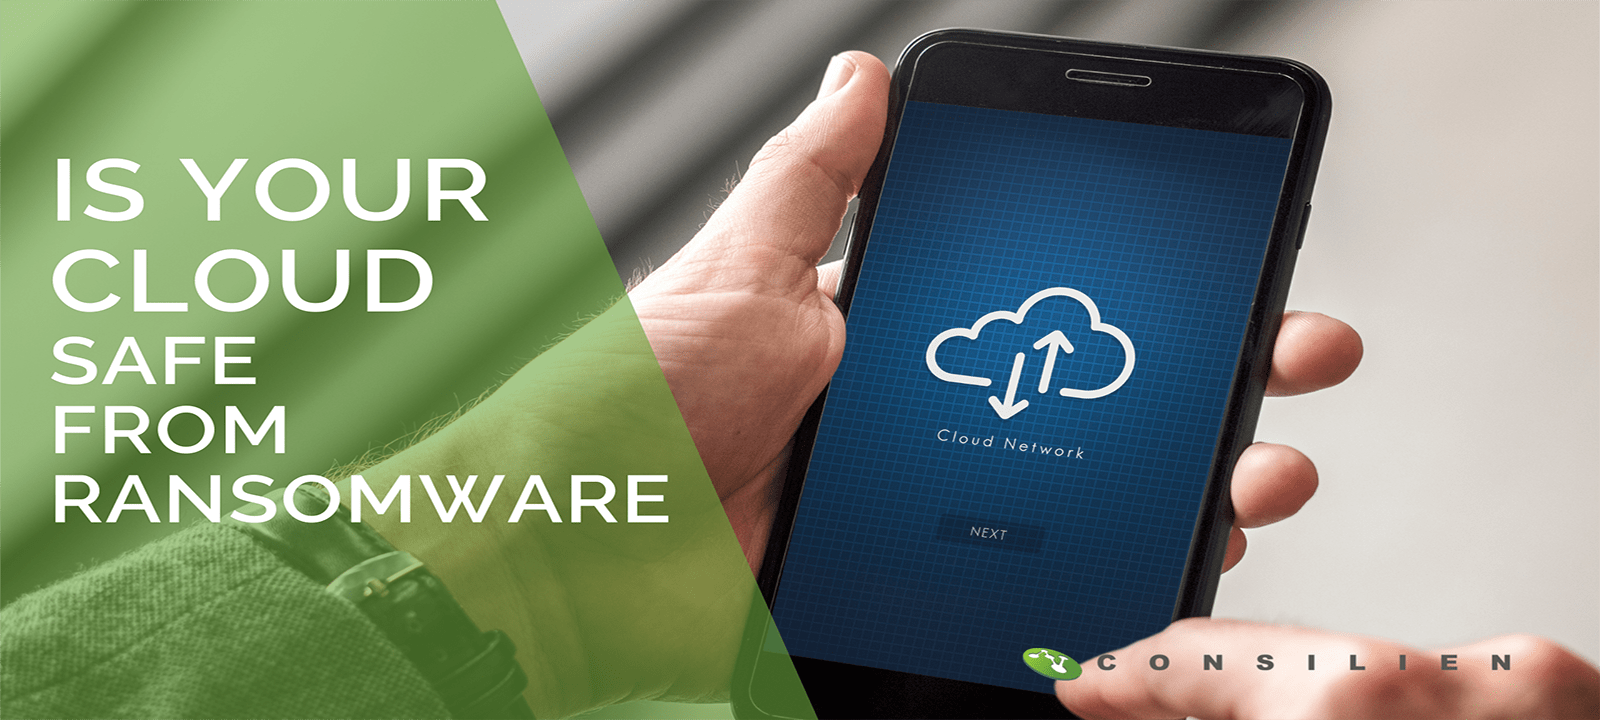 Is Your Cloud Safe from Ransomware?